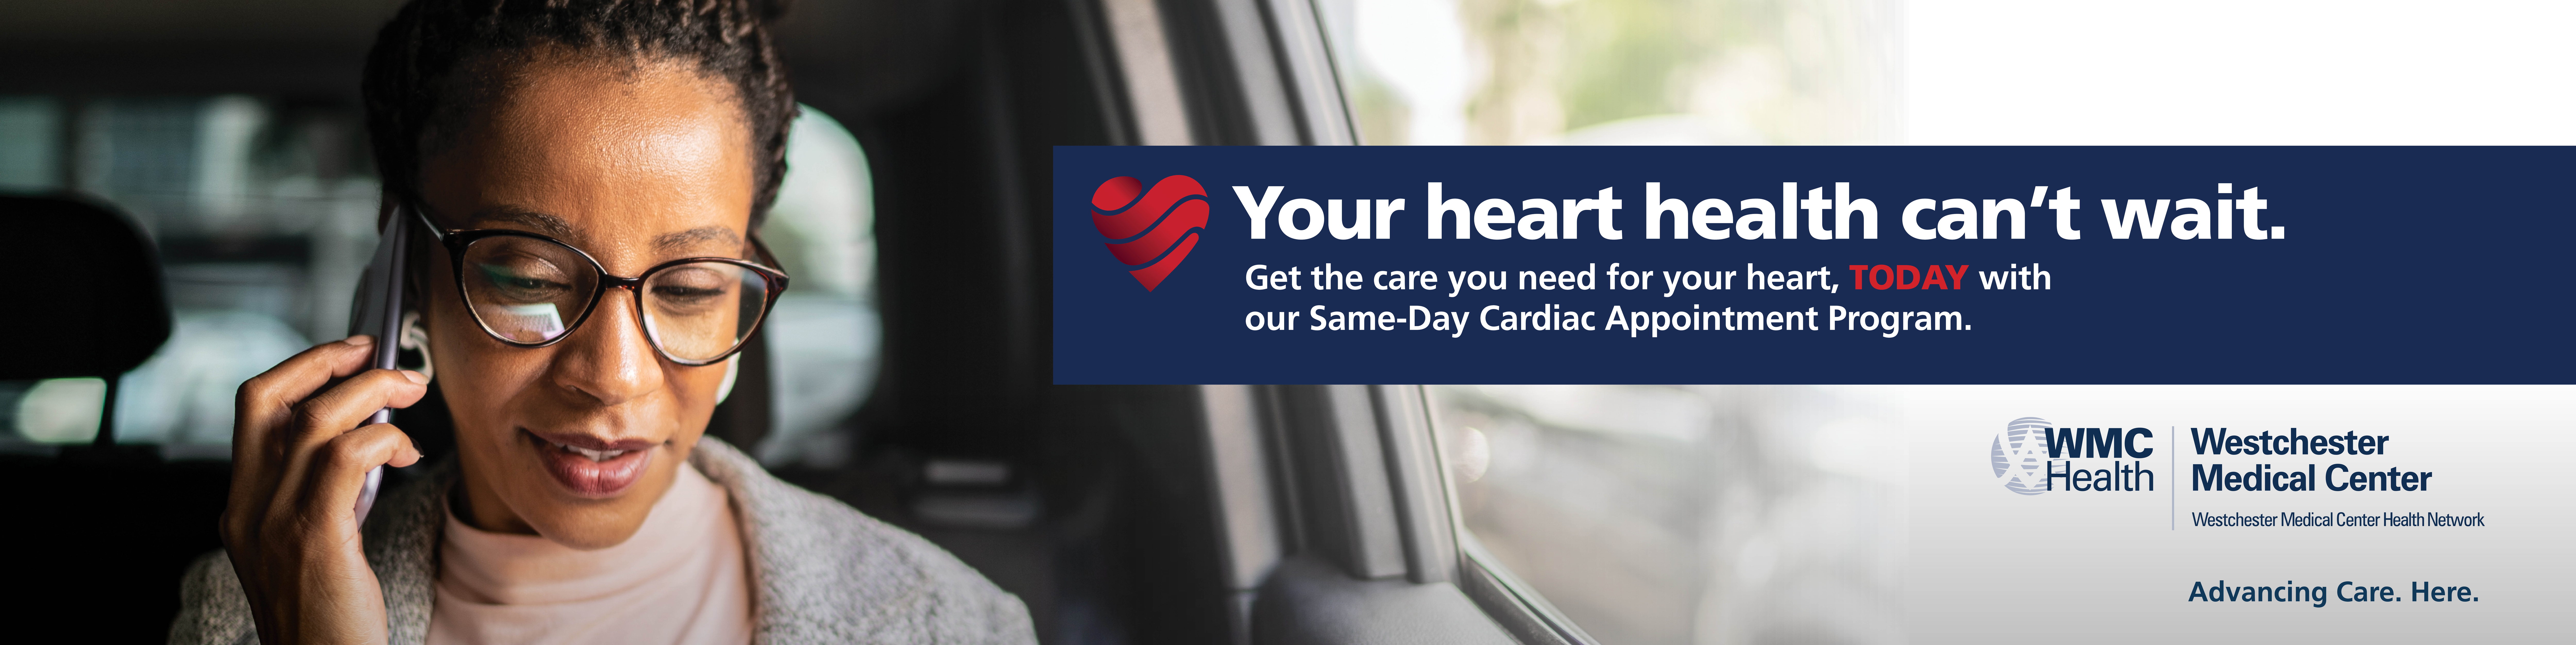 Get the care you need for your heart, TODAY with our Same-Day Cardiac Appointment Program